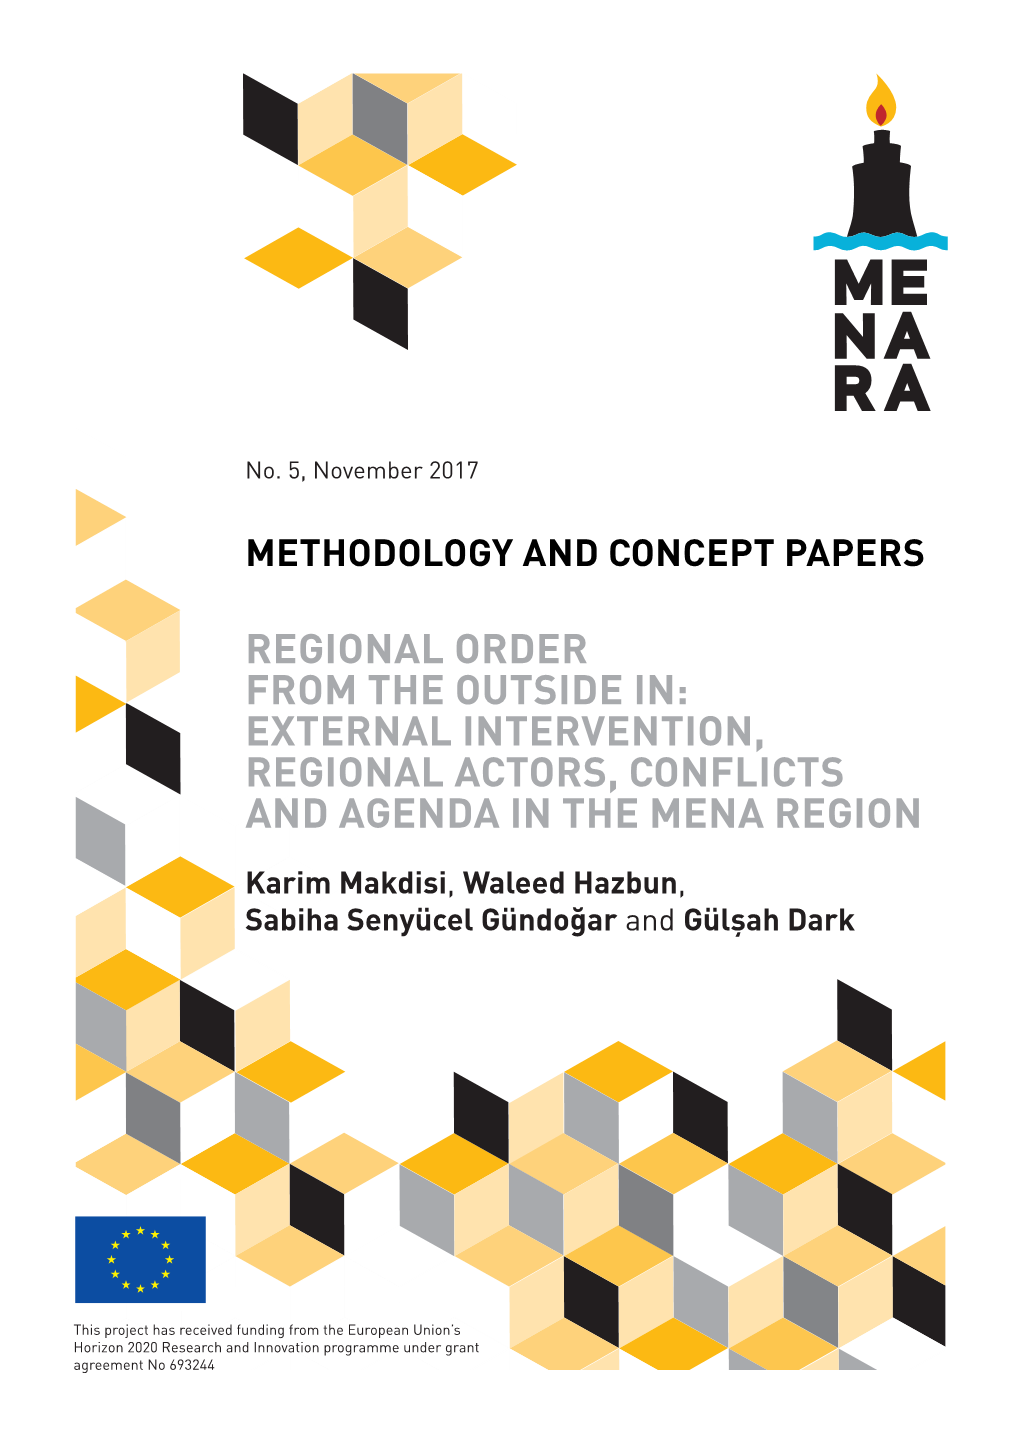 External Intervention, Regional Actors, Conflicts and Agenda in the Mena Region